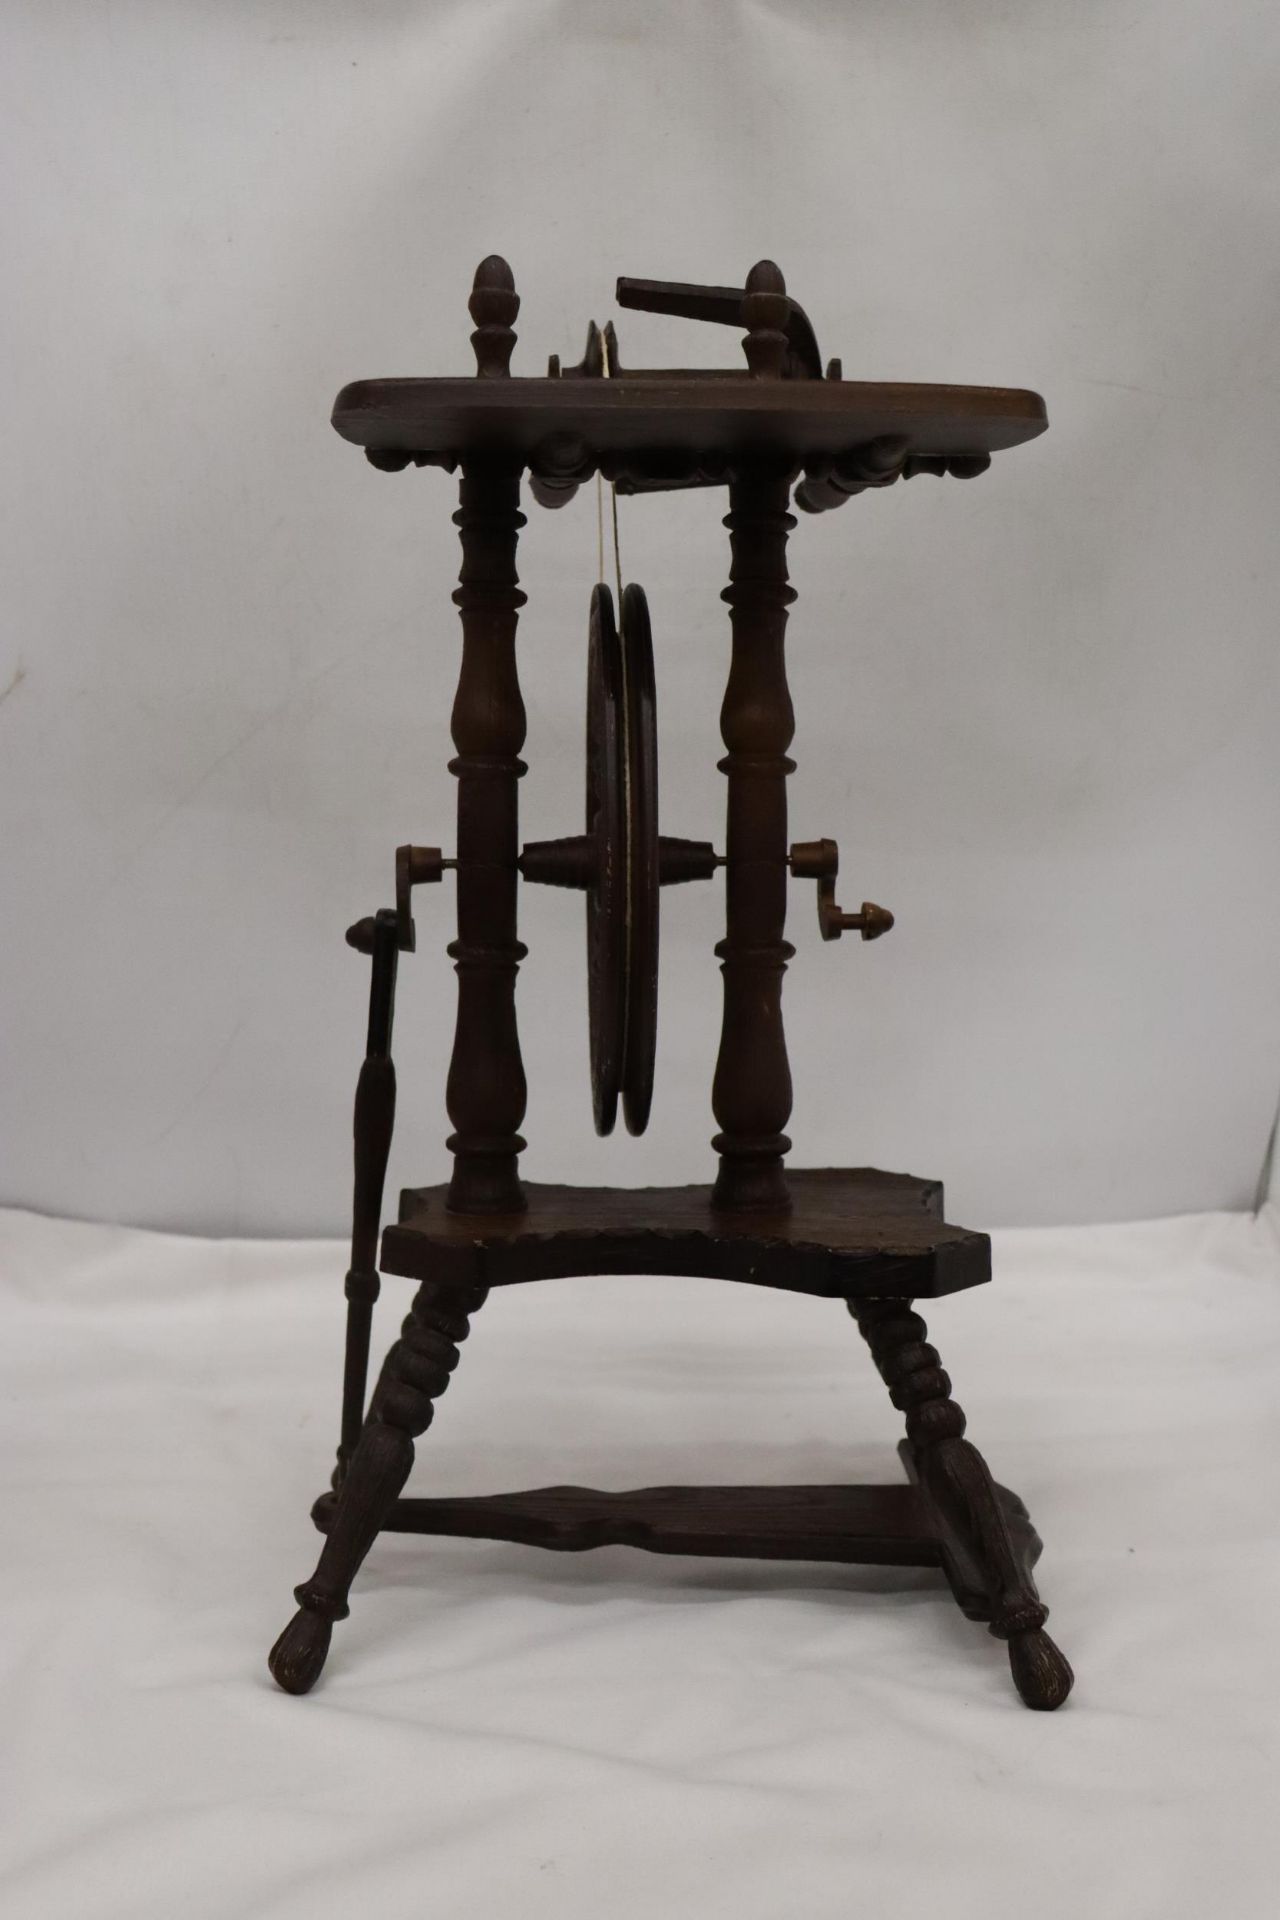 A SMALL VINTAGE WOODEN SPINNING WHEEL, HEIGHT APPROX 42CM - Image 3 of 5